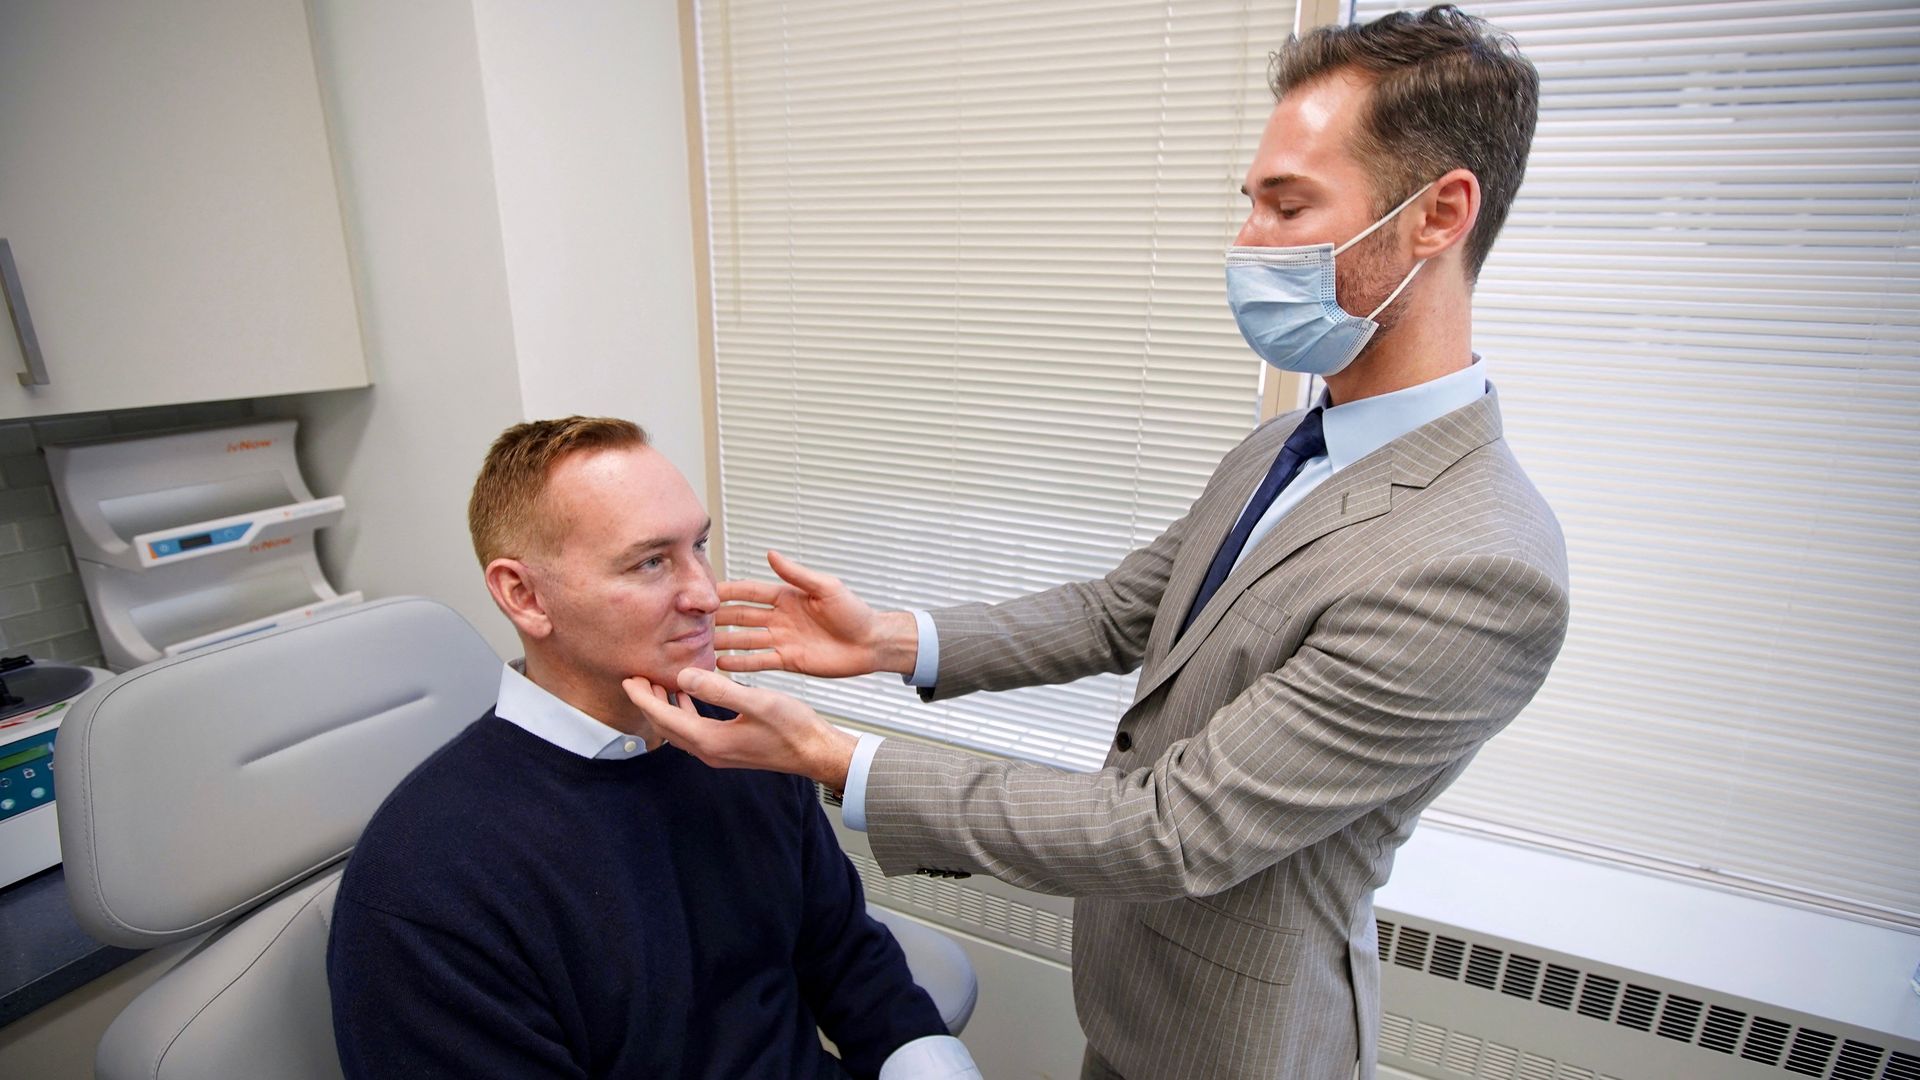 A plastic surgeon examines a male patient in a doctor's chair.